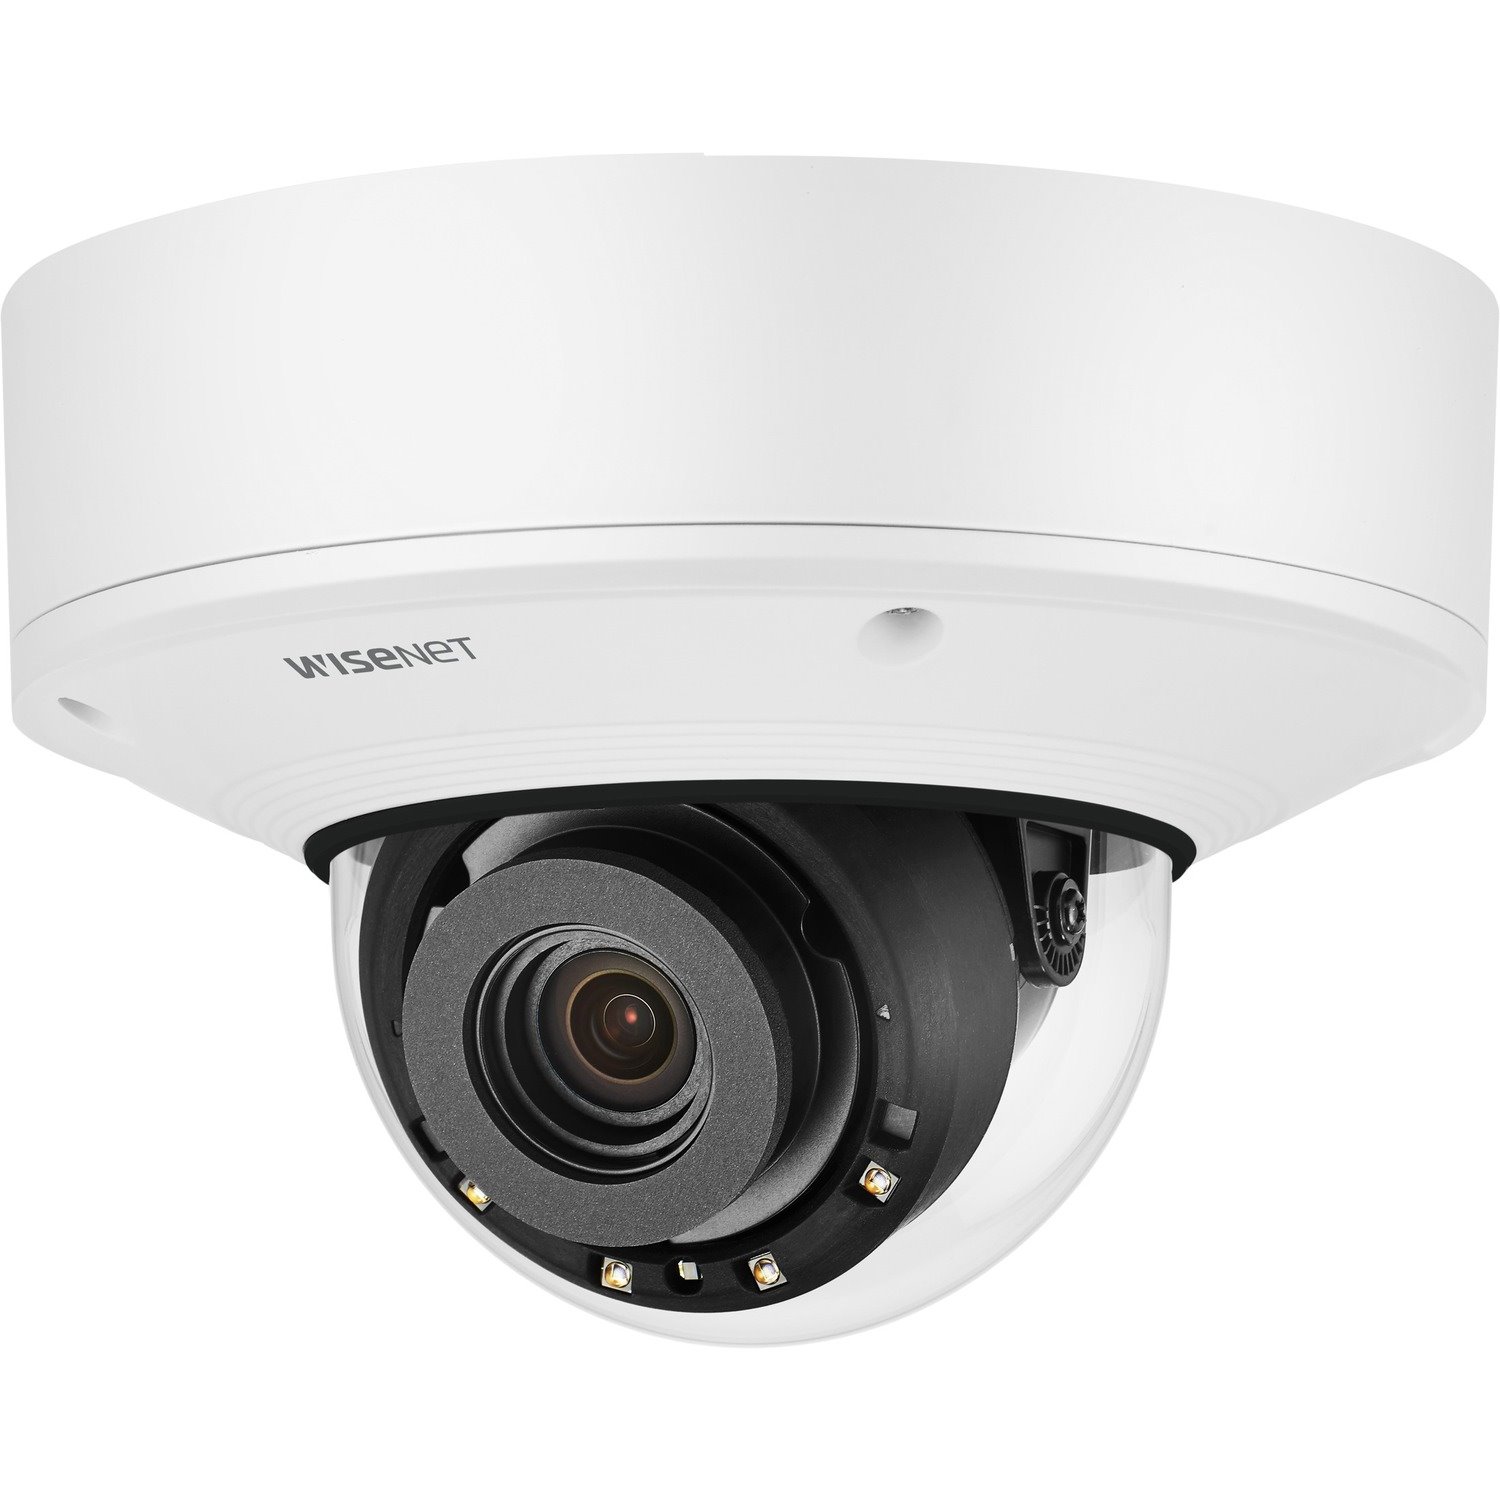 Wisenet XNV-8082R 6 Megapixel Indoor/Outdoor Network Camera - Color - Dome - White